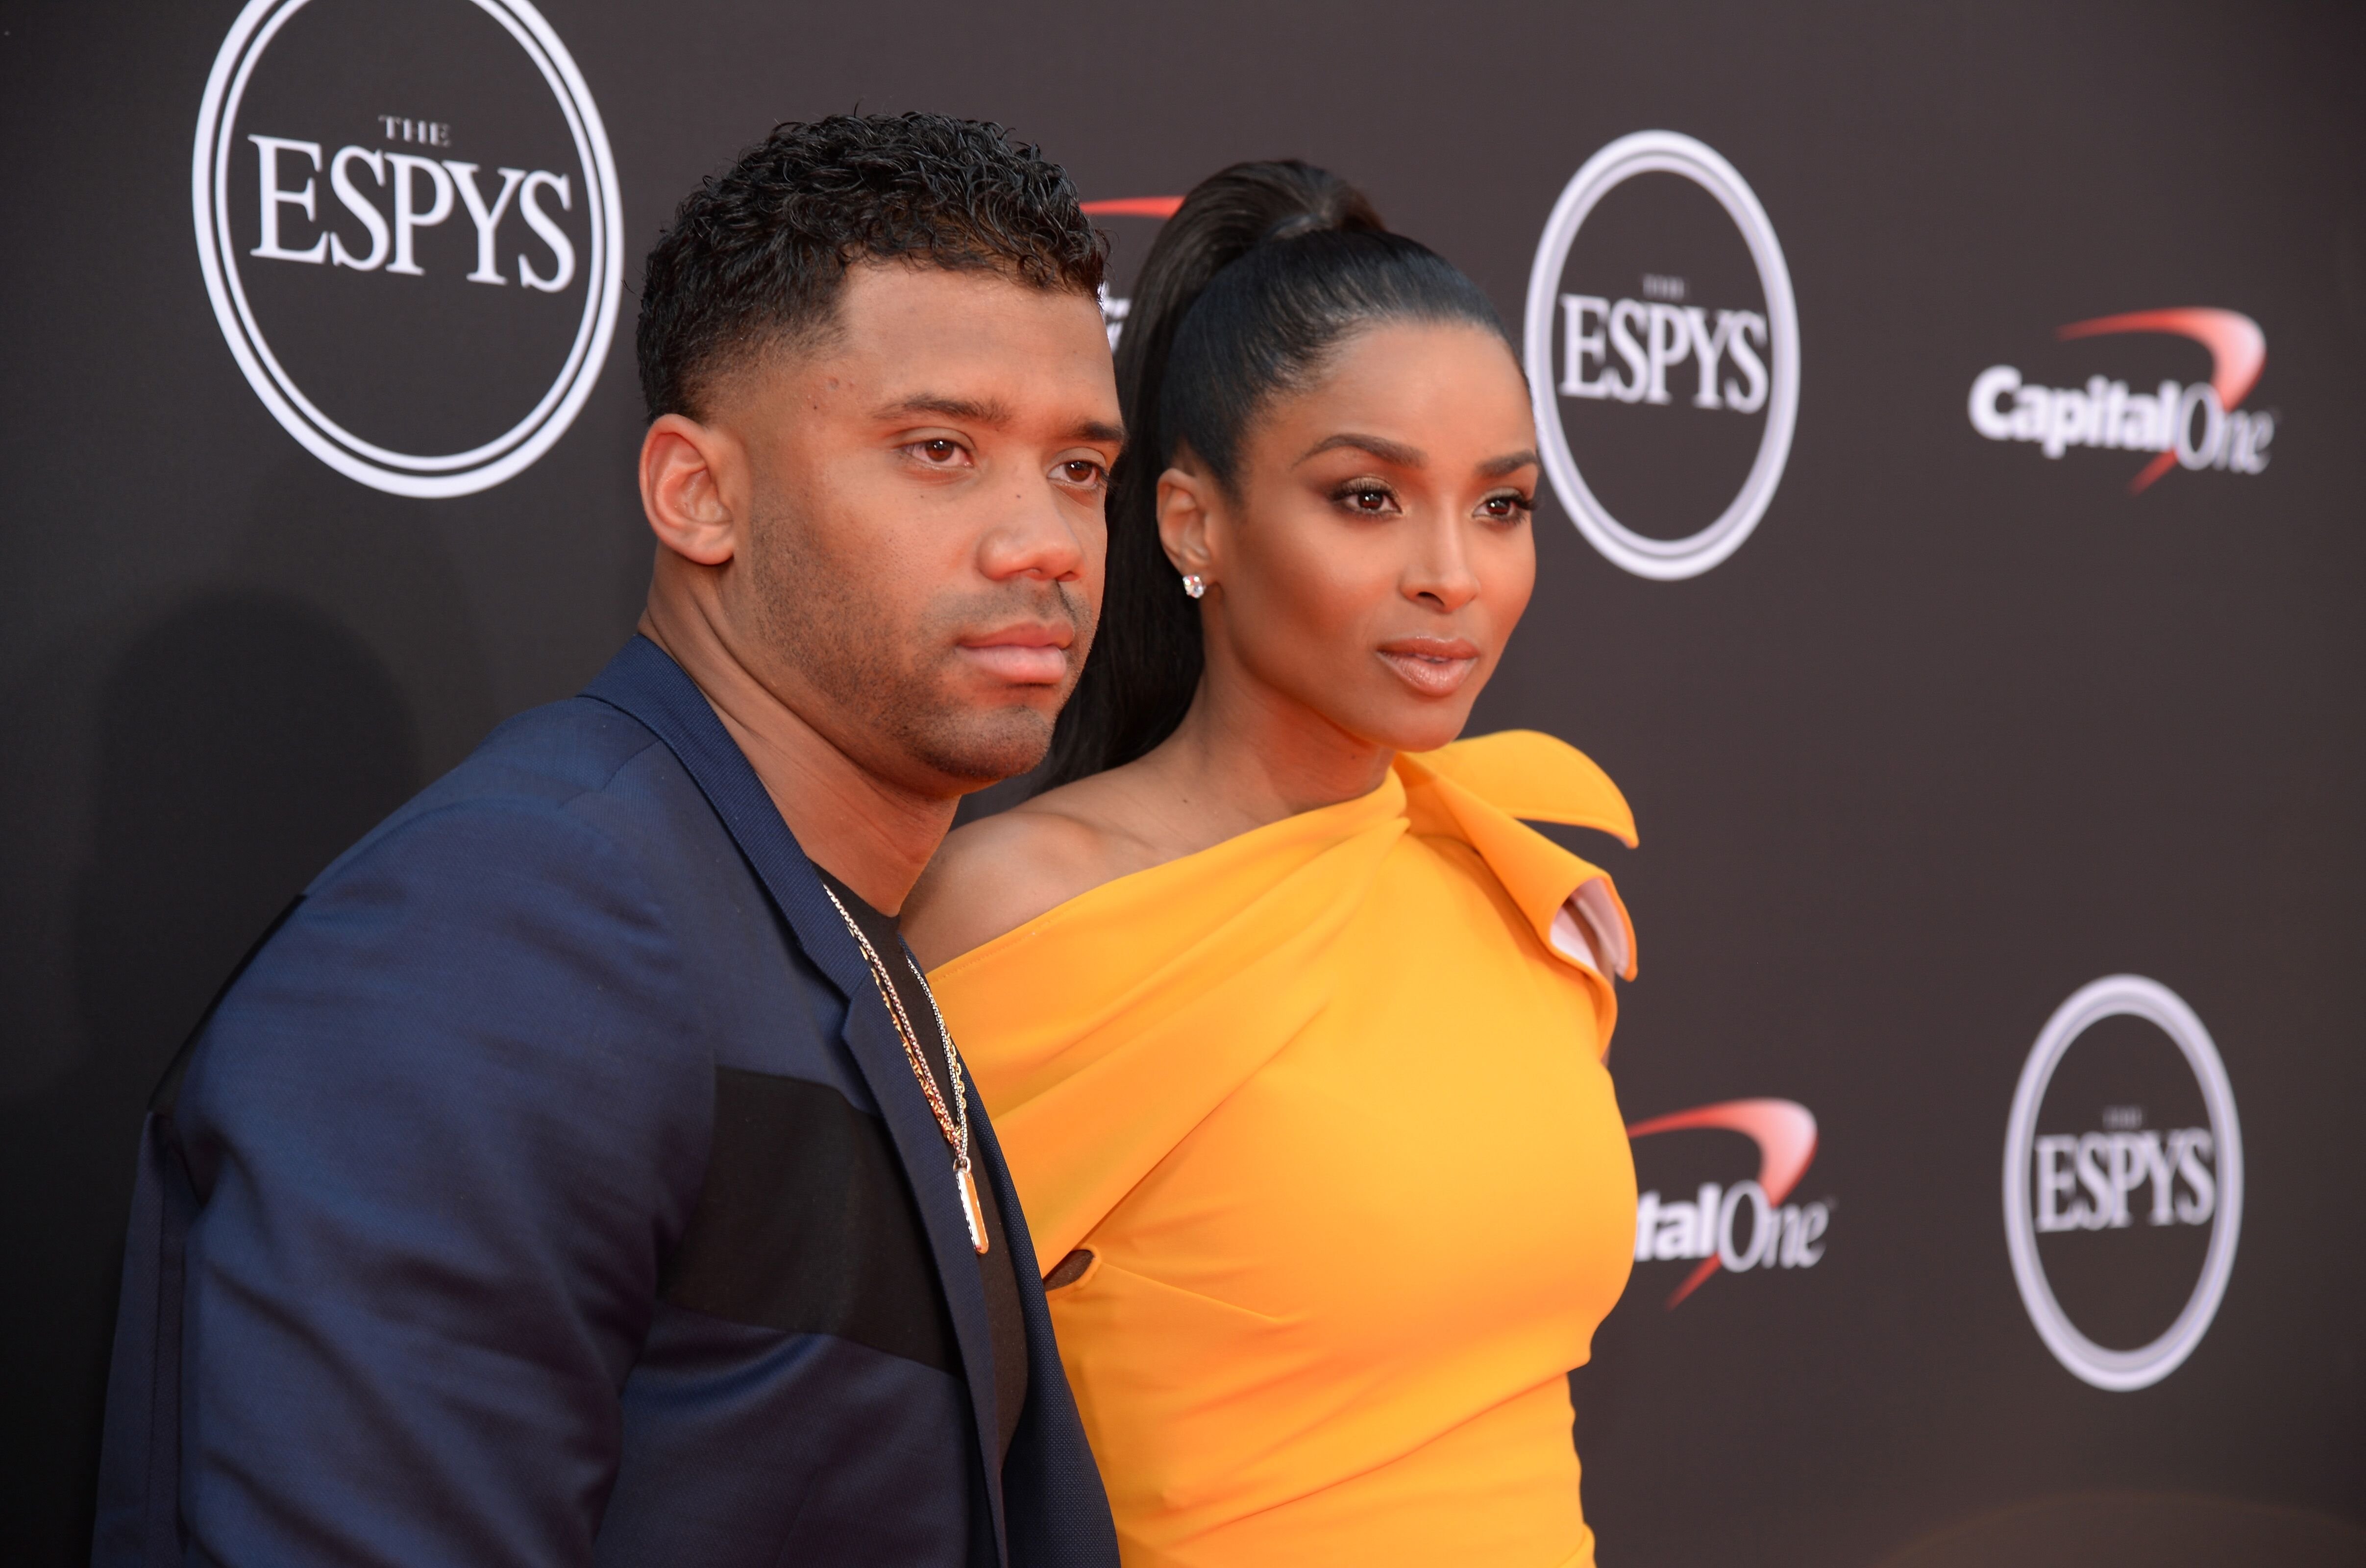 Ciara and Russell Wilson attend the 2018 ESPY Awards Red Carpet Show Live! Celebrates With Moet & Chandon at Microsoft Theater on July 18, 2018 in Los Angeles, California | Photo: Getty Images